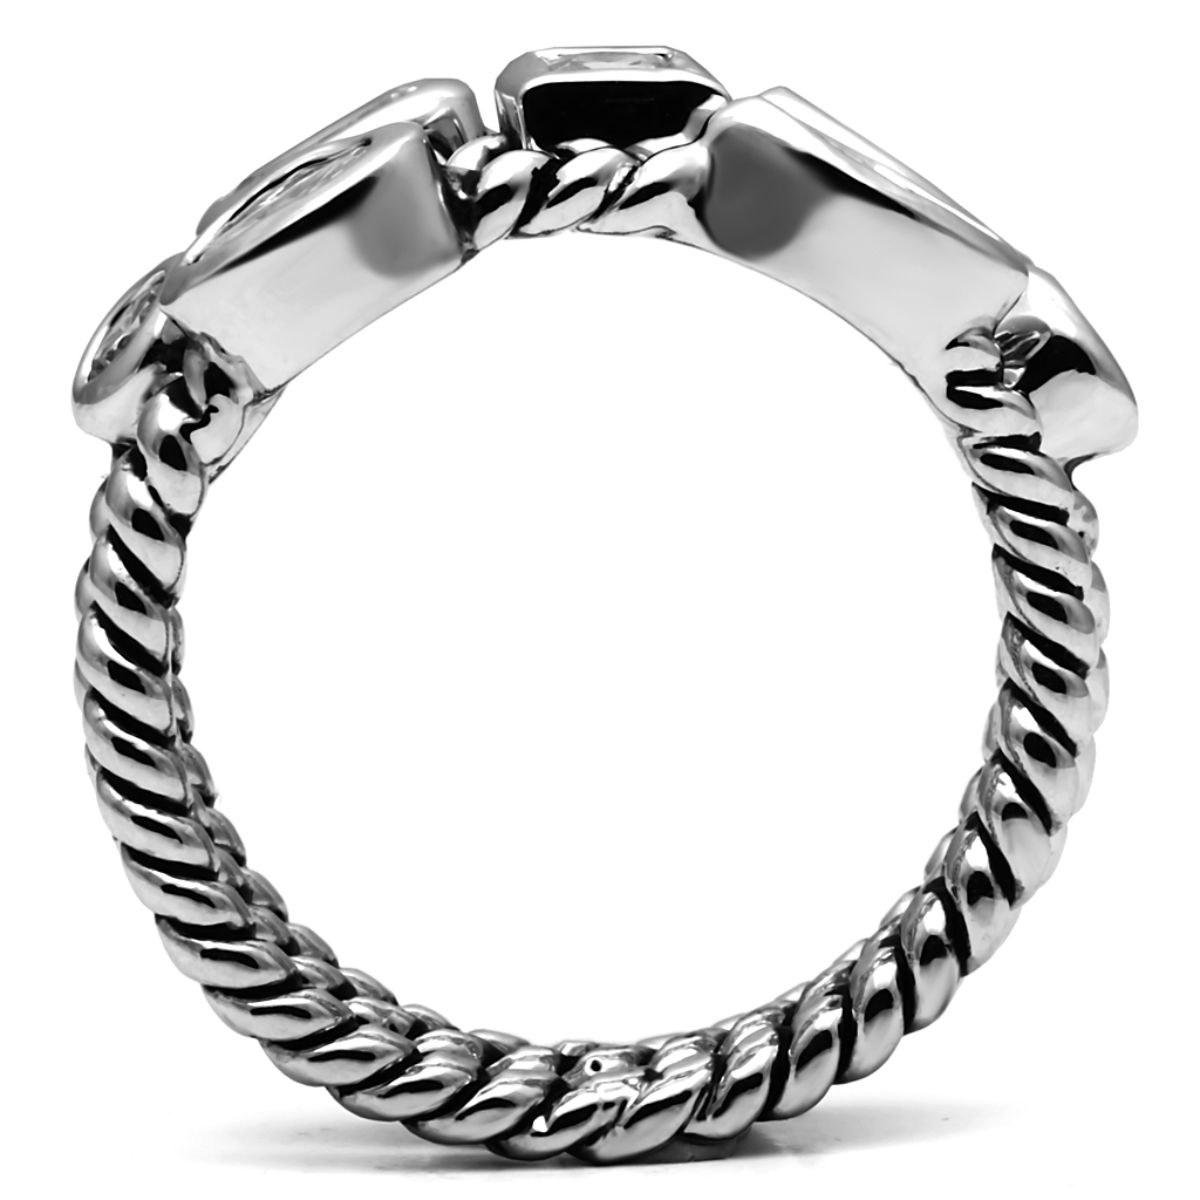 Luxe Jewelry Designs 3-Piece Women's Stainless Steel Stackable Ring Set with Cubic Zirconia, Size 8